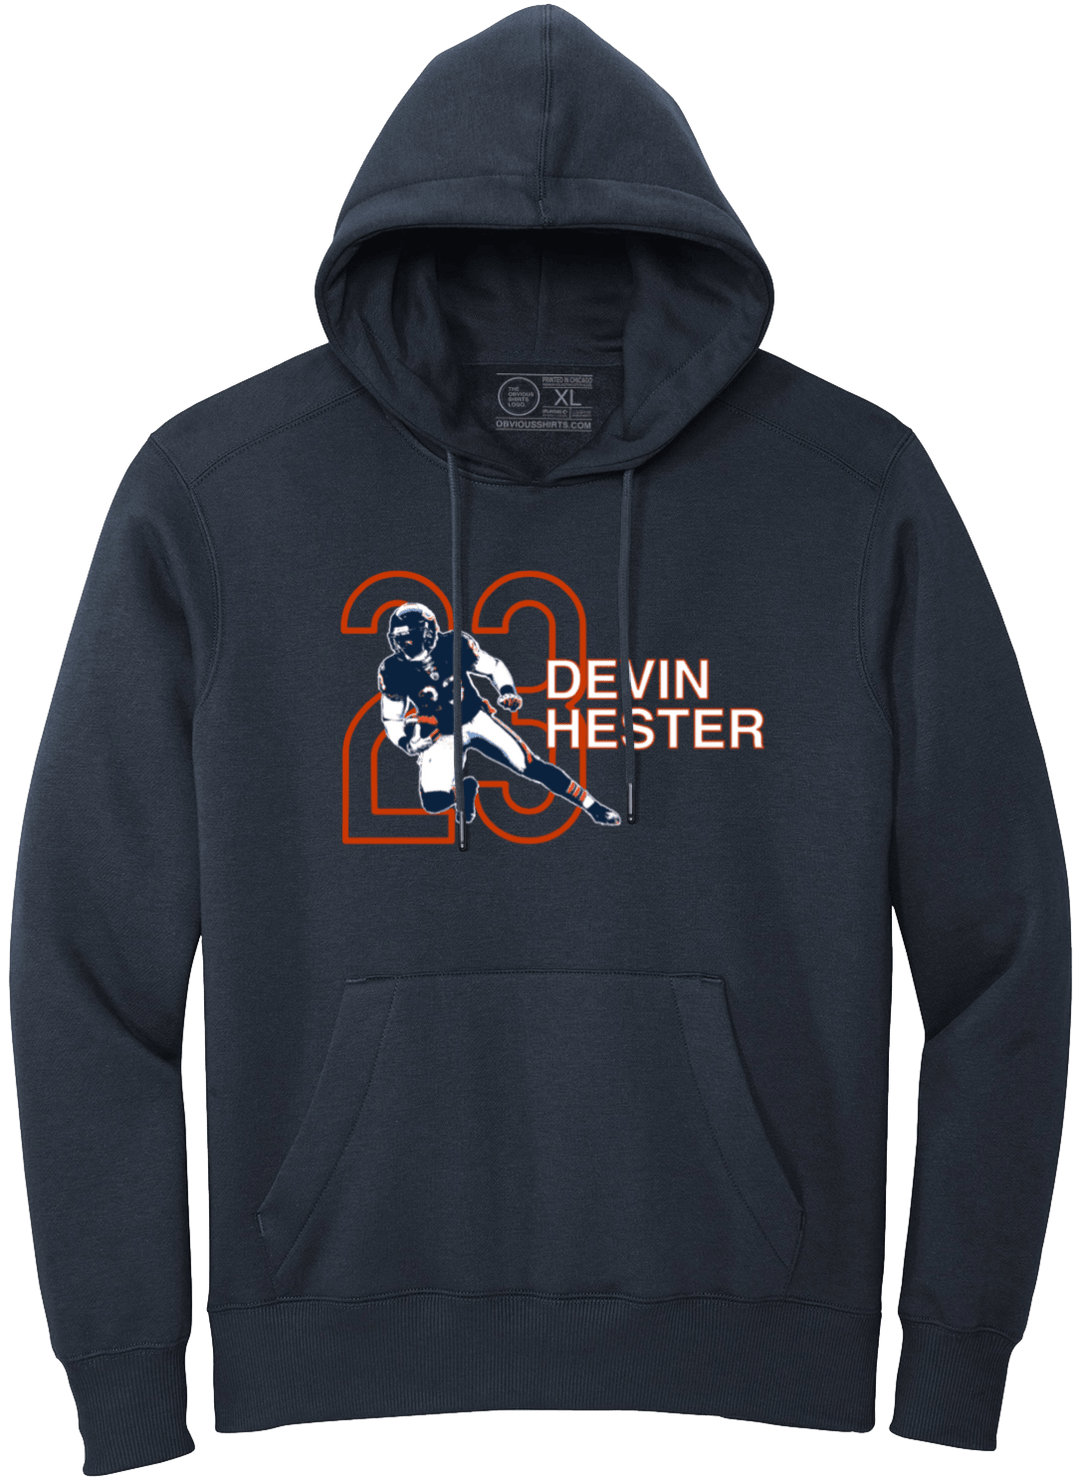 DEVIN HESTER GRAPHIC (HOODED SWEATSHIRT) - OBVIOUS SHIRTS